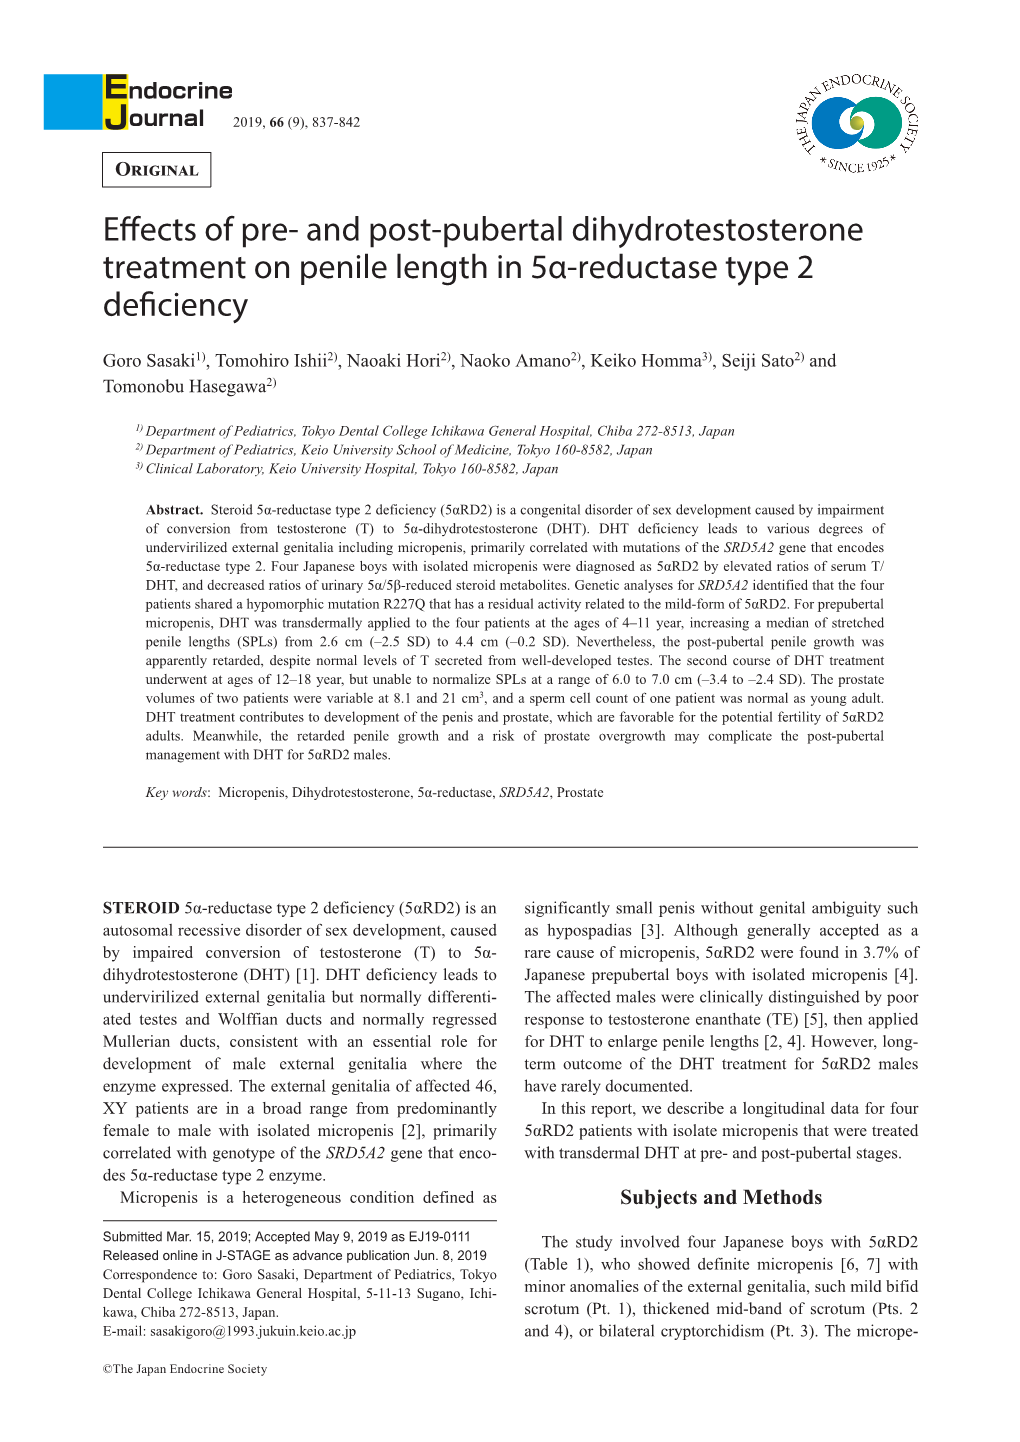 And Post-Pubertal Dihydrotestosterone Treatment on Penile Length in 5Α-Reductase Type 2 Deficiency